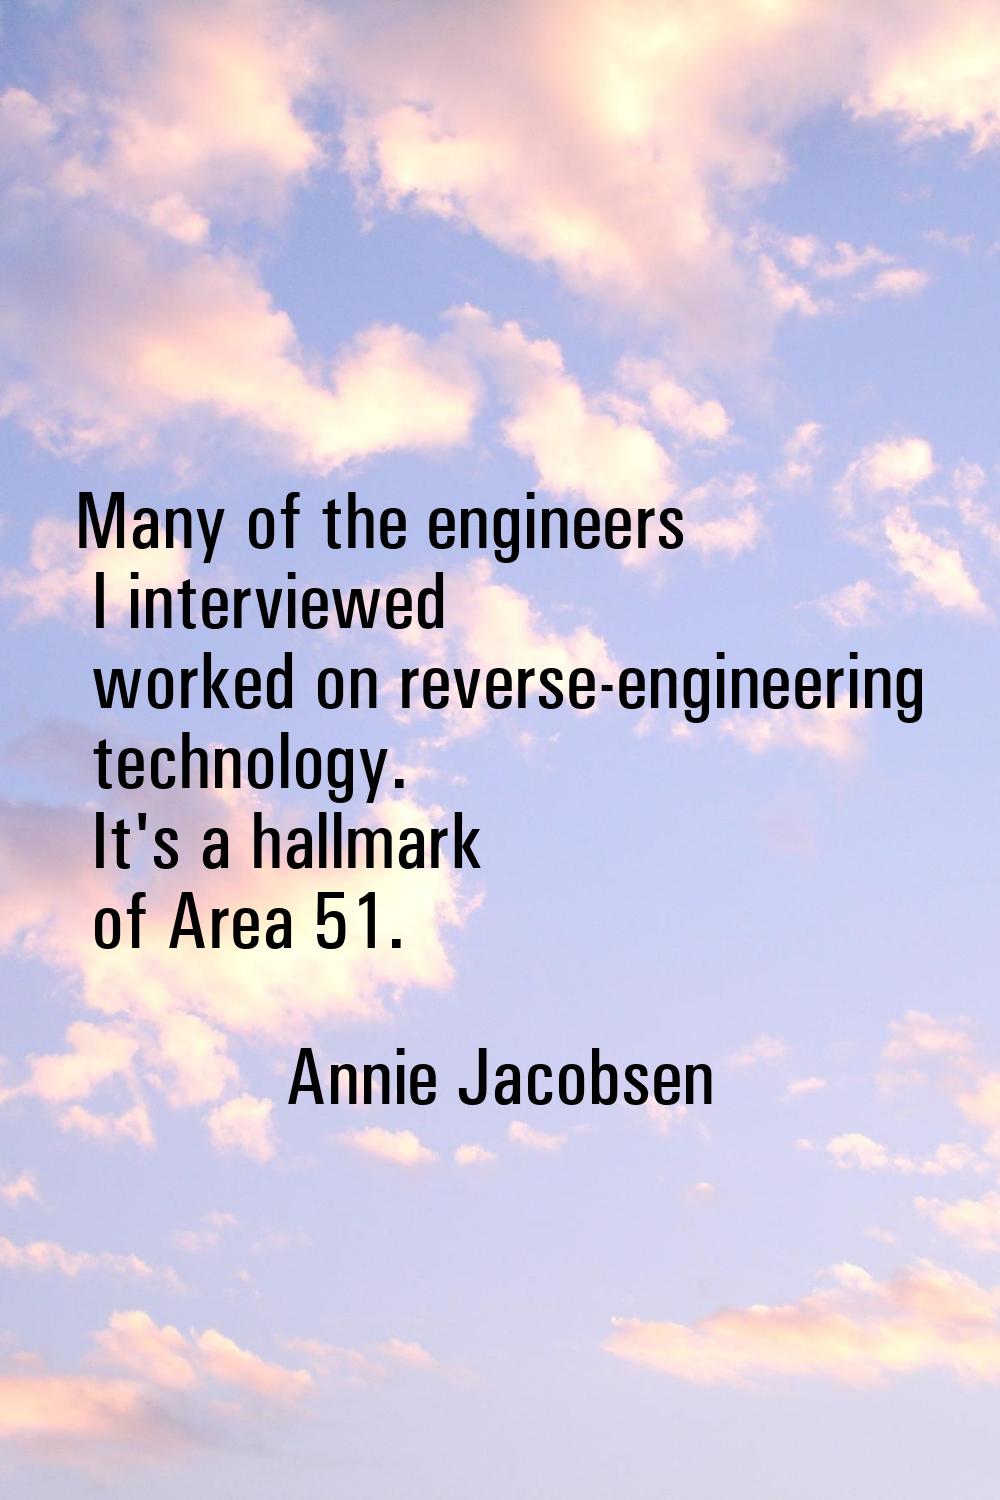 Many of the engineers I interviewed worked on reverse-engineering technology. It's a hallmark of Ar